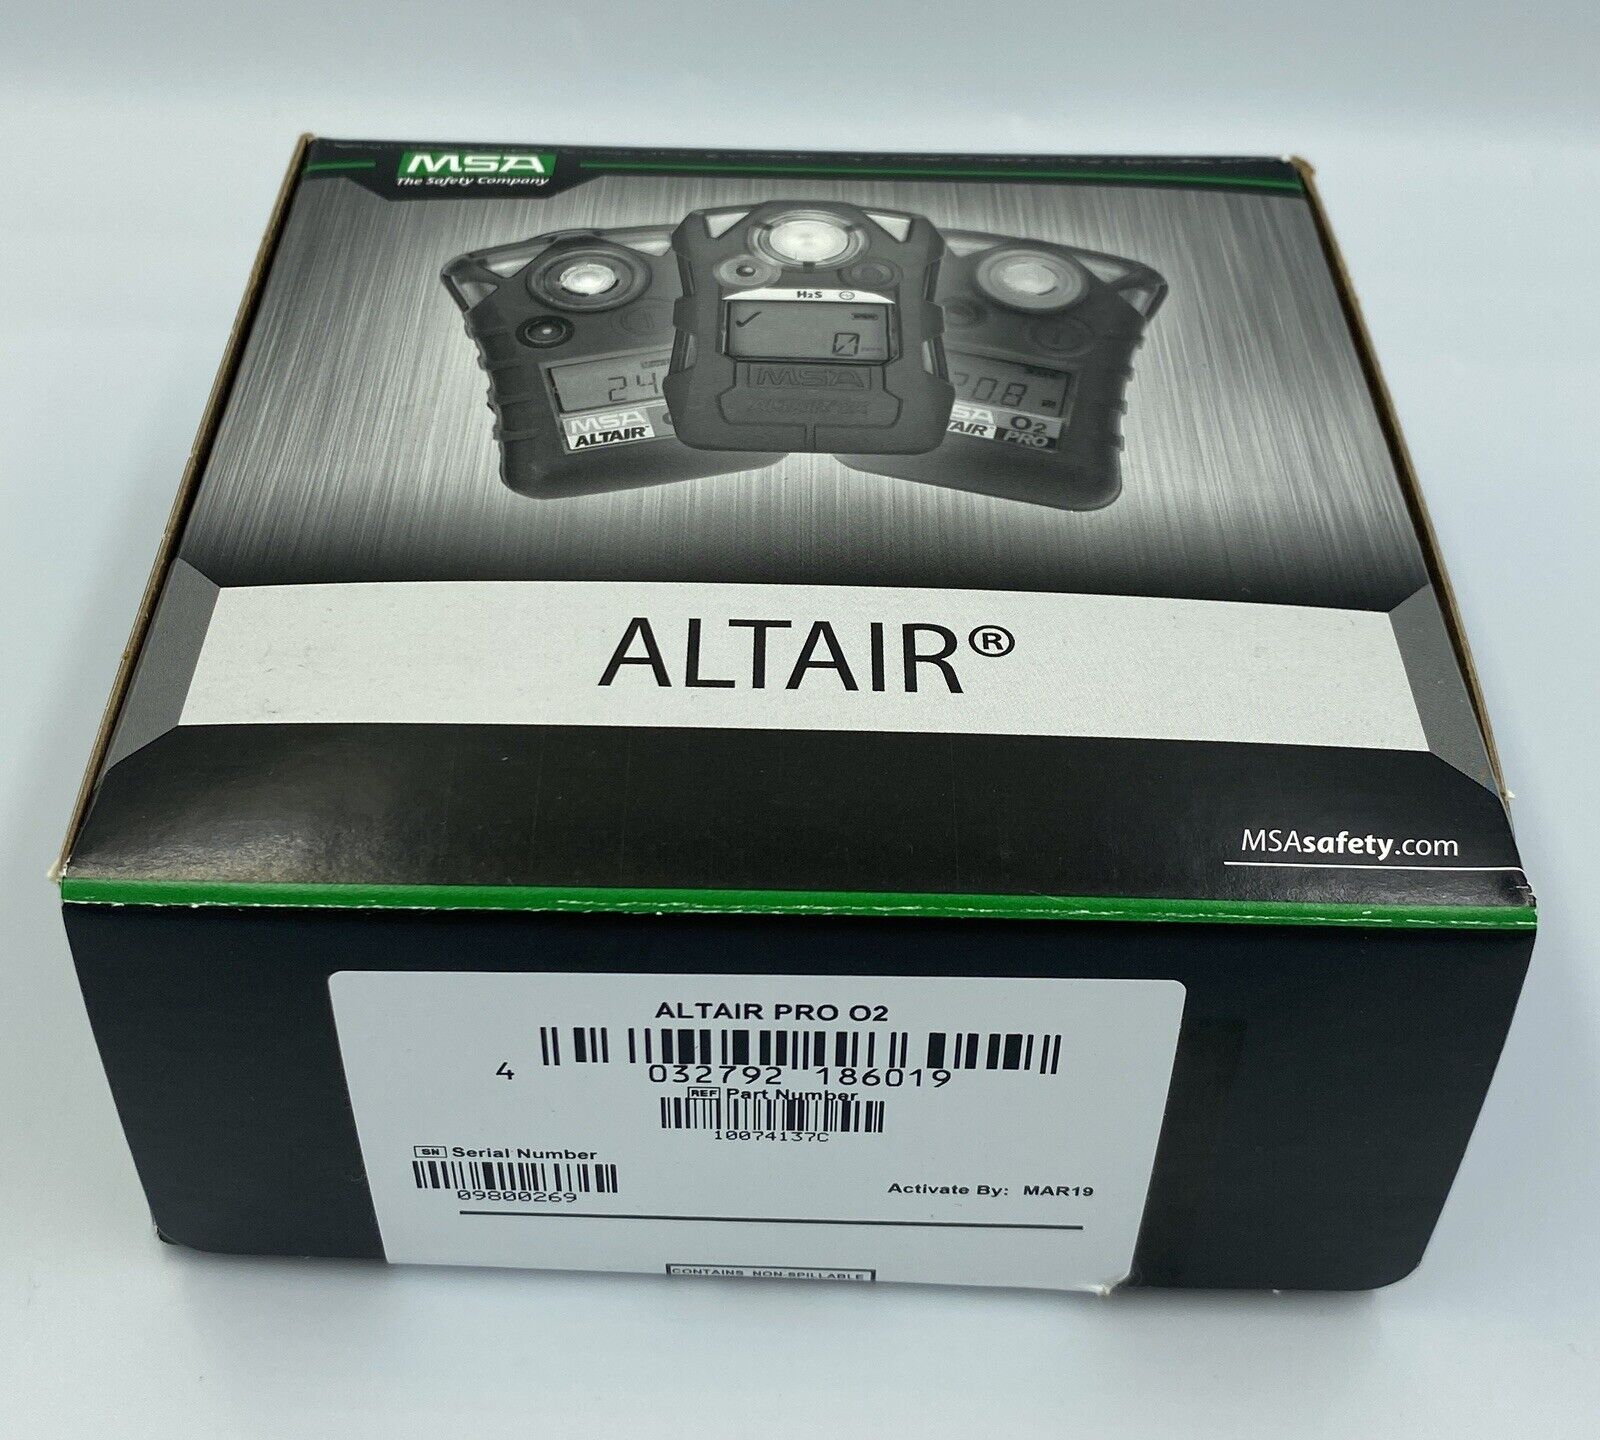 New MSA Altair Pro O2 Gas Detector (Part Number 10074137c) - Open Box